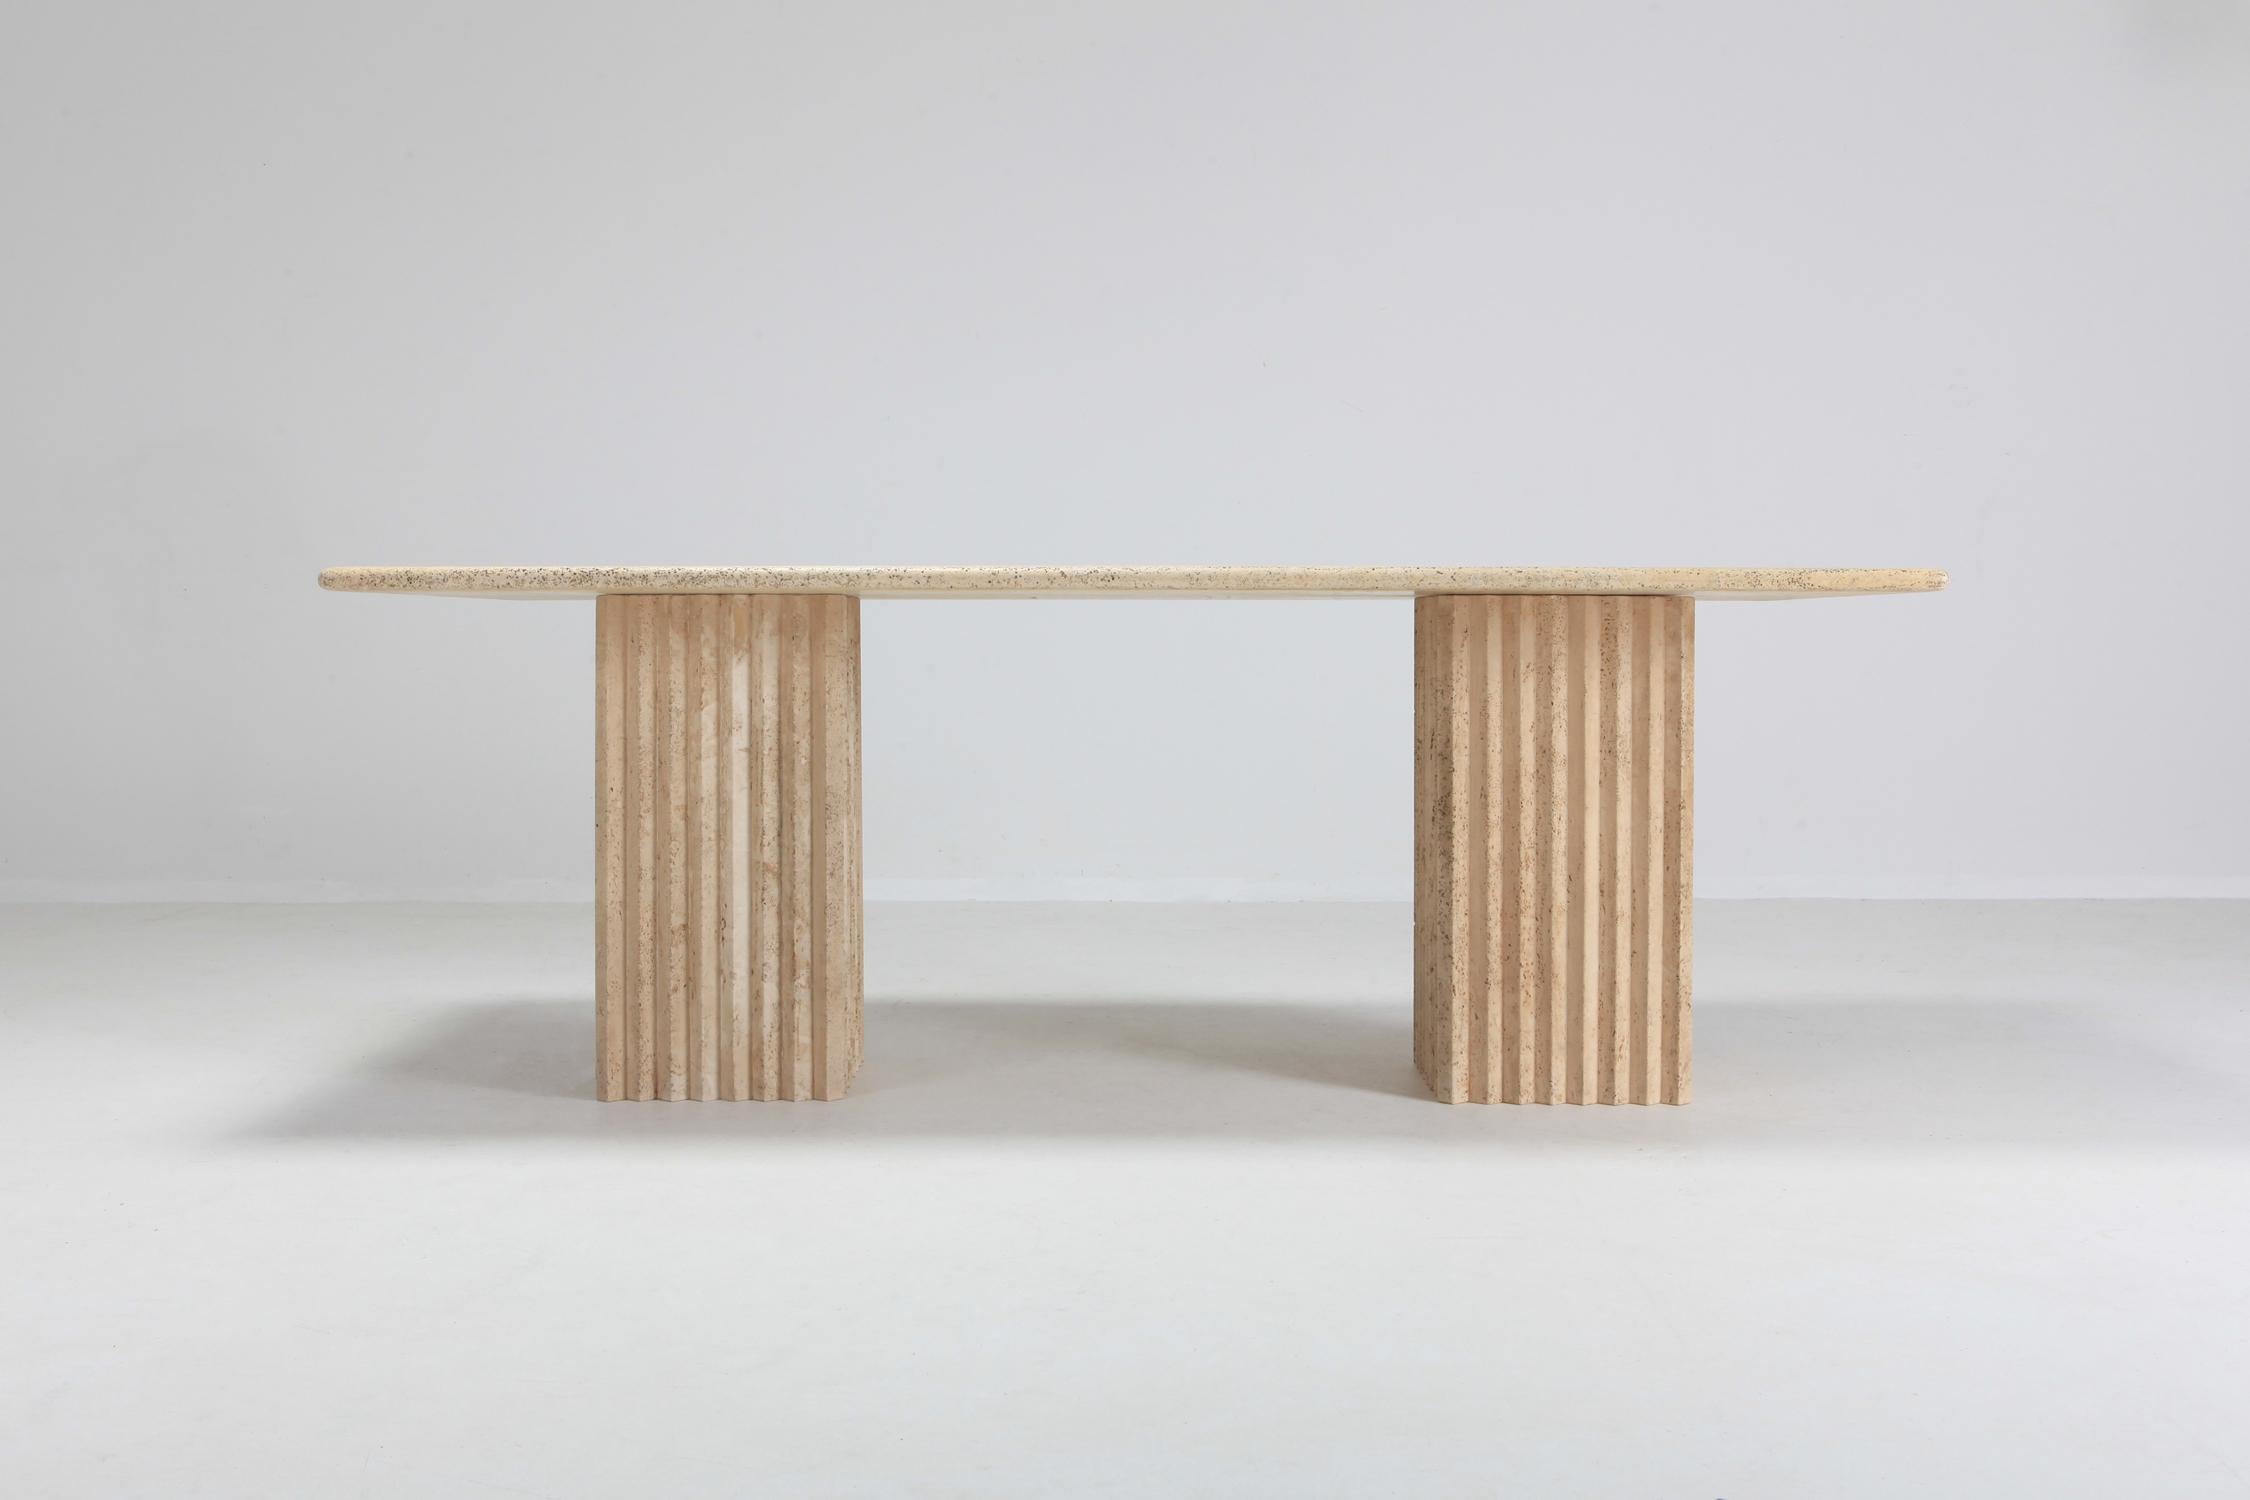 Postmodern piece in travertine marble that can be used as a writing desk or dining table.
Fits 6 to 8 persons.
The two impressive columns are not attached to the table, these can be placed freely underneath the top. You could also turn them 45° so